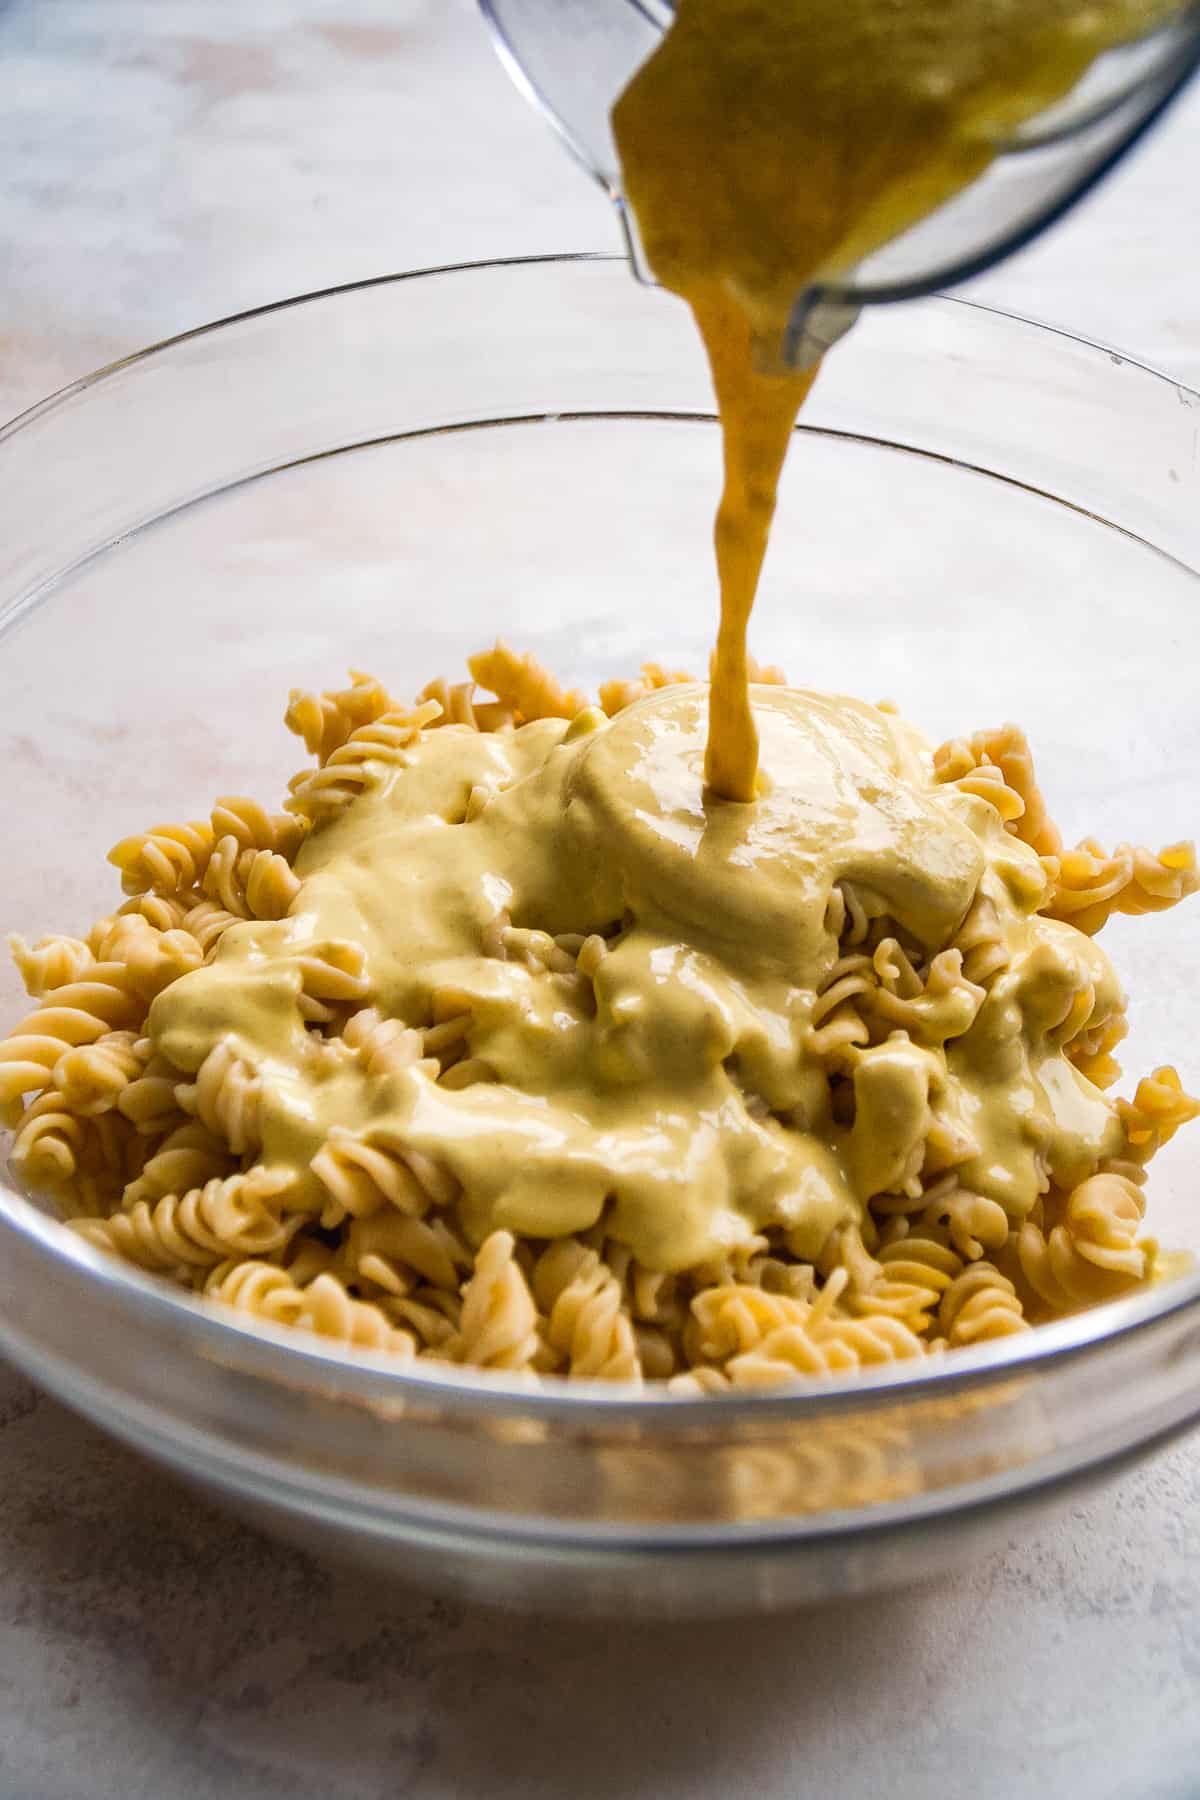 Deviled egg sauce being poured over pasta in a large bowl.